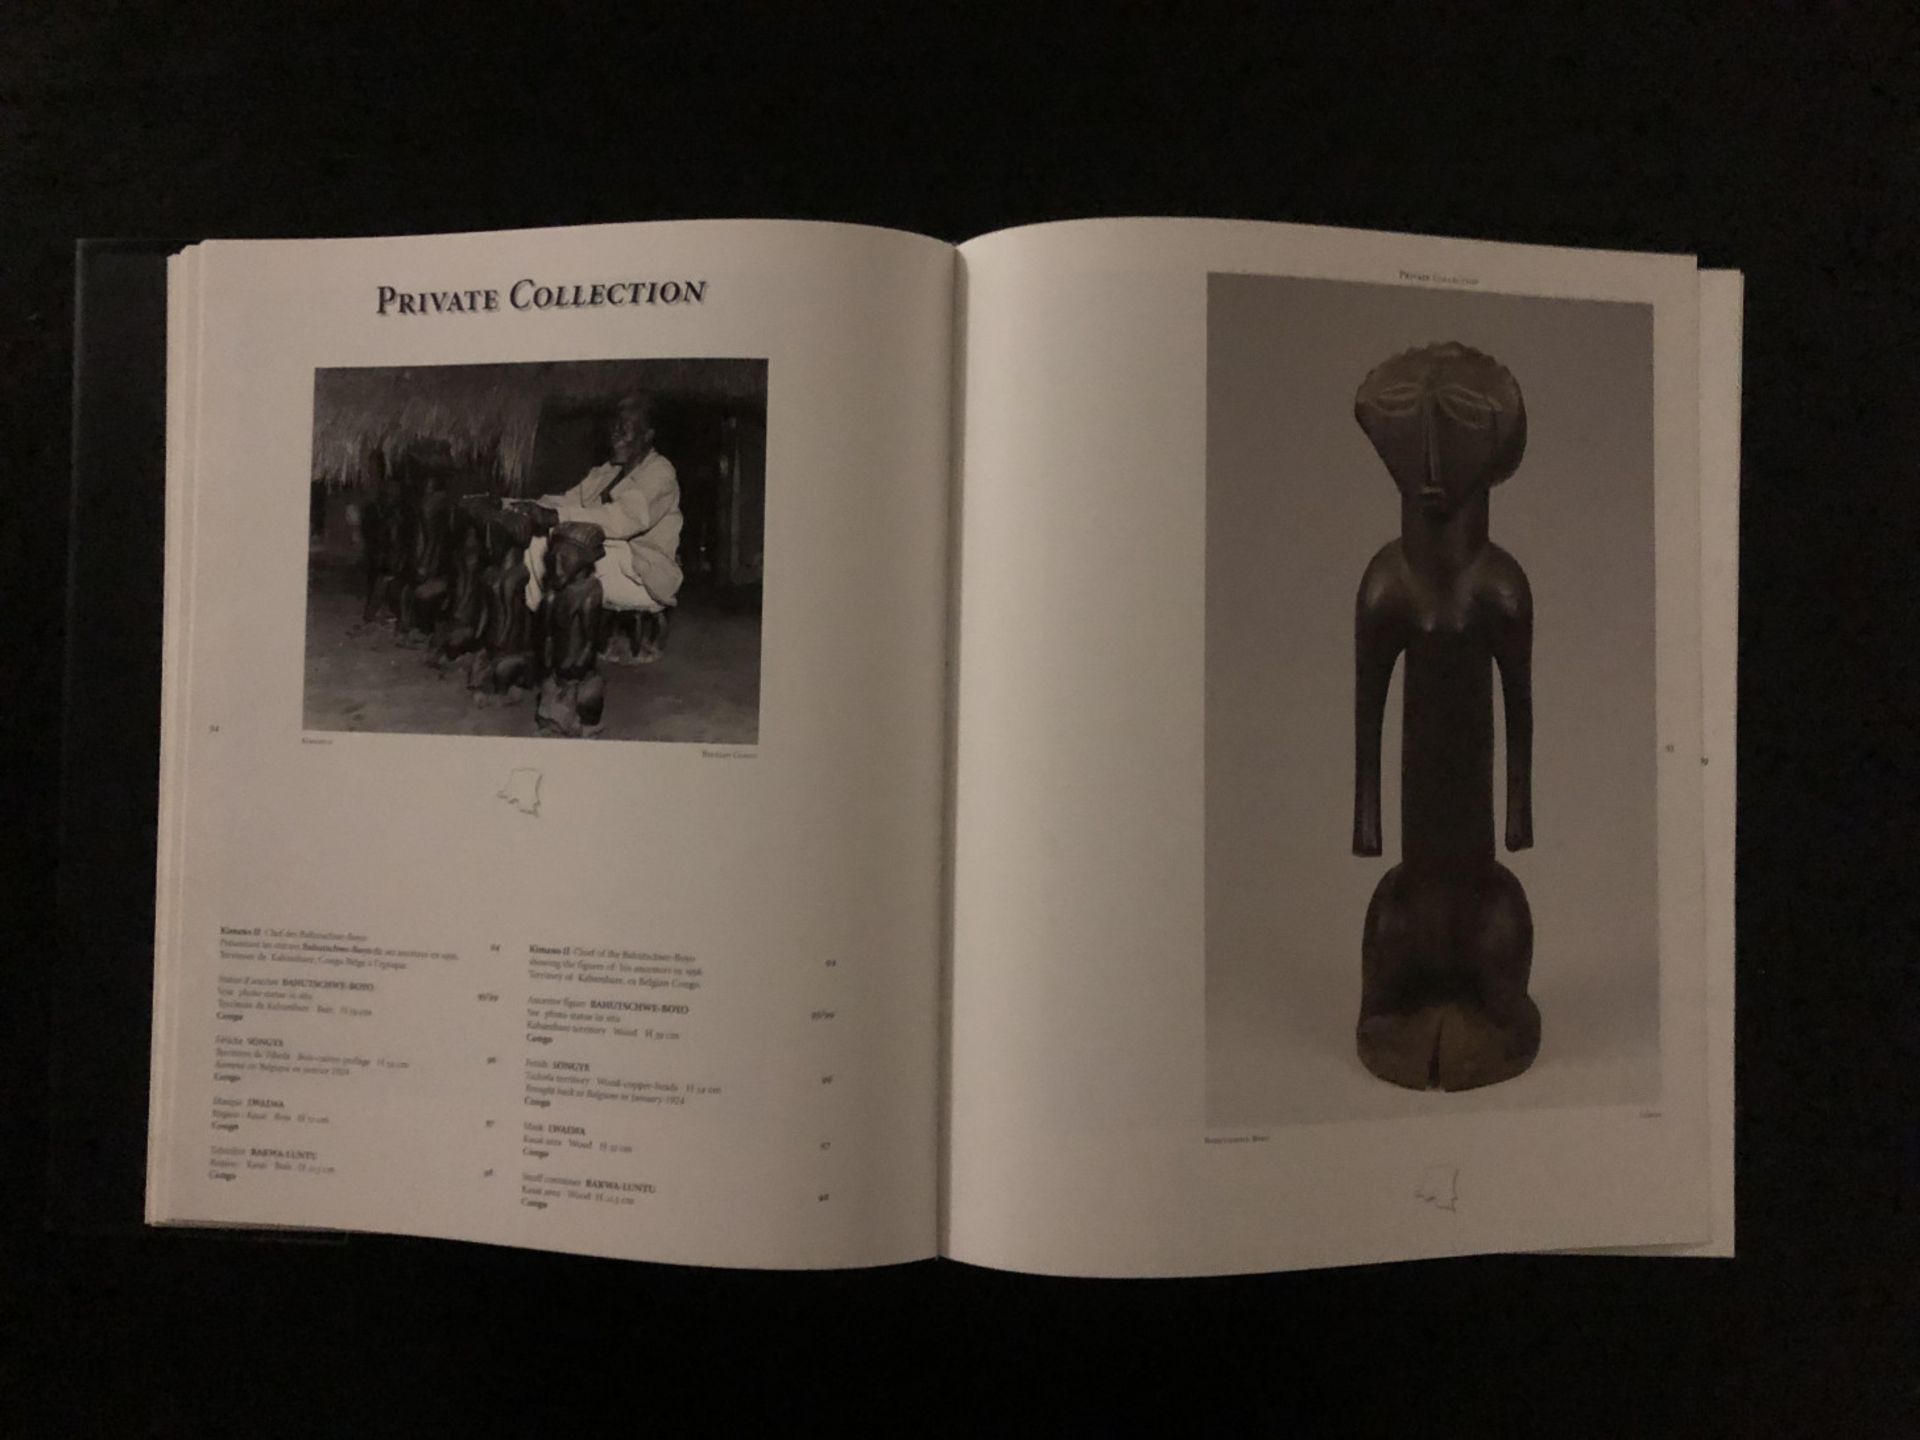 Belgium Collects African Art, Dick Beaulieux, Arts&Applications 2000, Bruxelles - Image 2 of 2